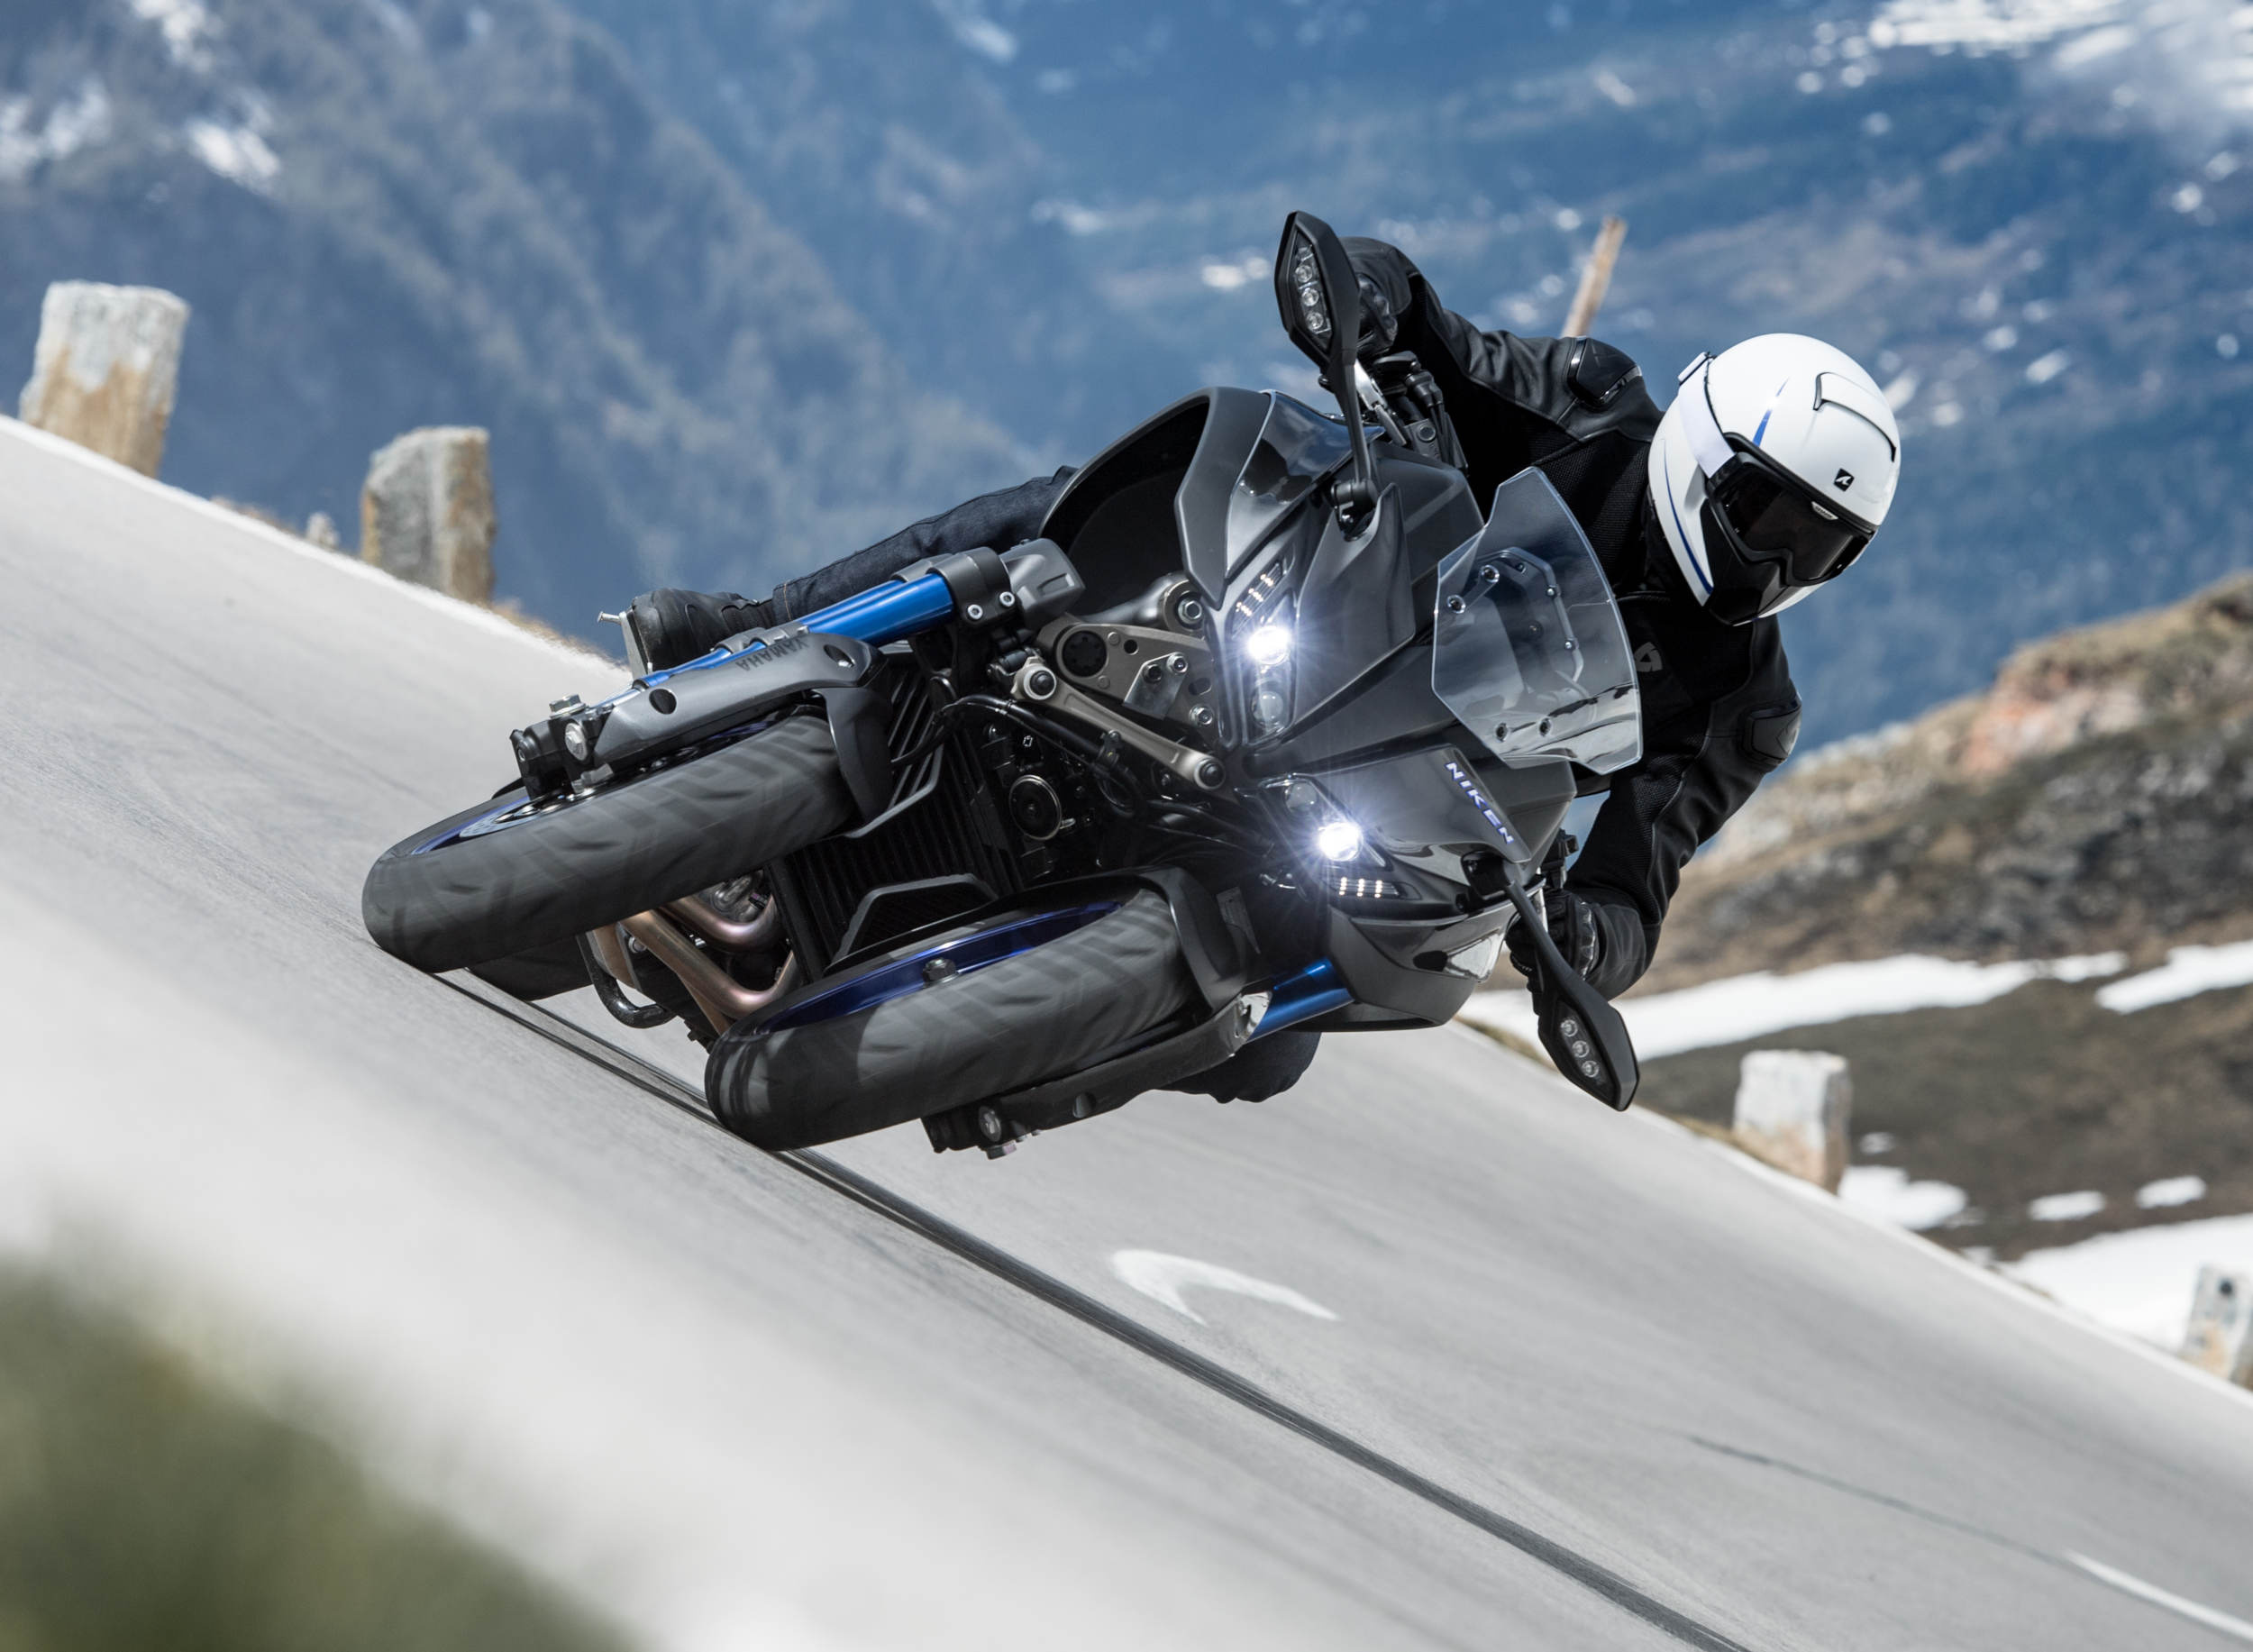 Yamaha Niken, Price and availability announcement, Limited stock, Motorcycle enthusiasts' delight, 2500x1840 HD Desktop